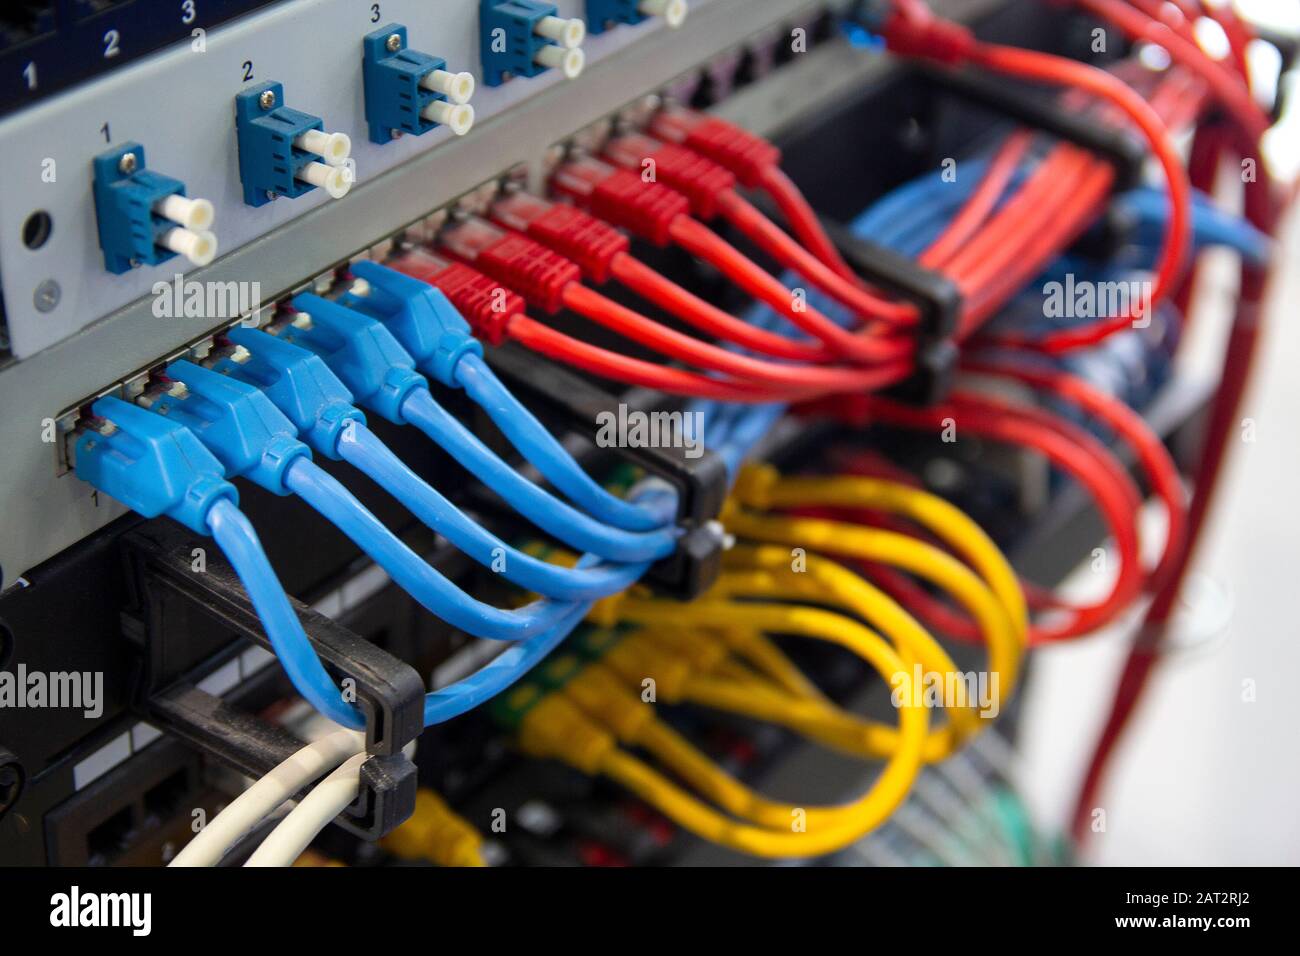 Network switch and UTP ethernet cables. Electronics Stock Photo